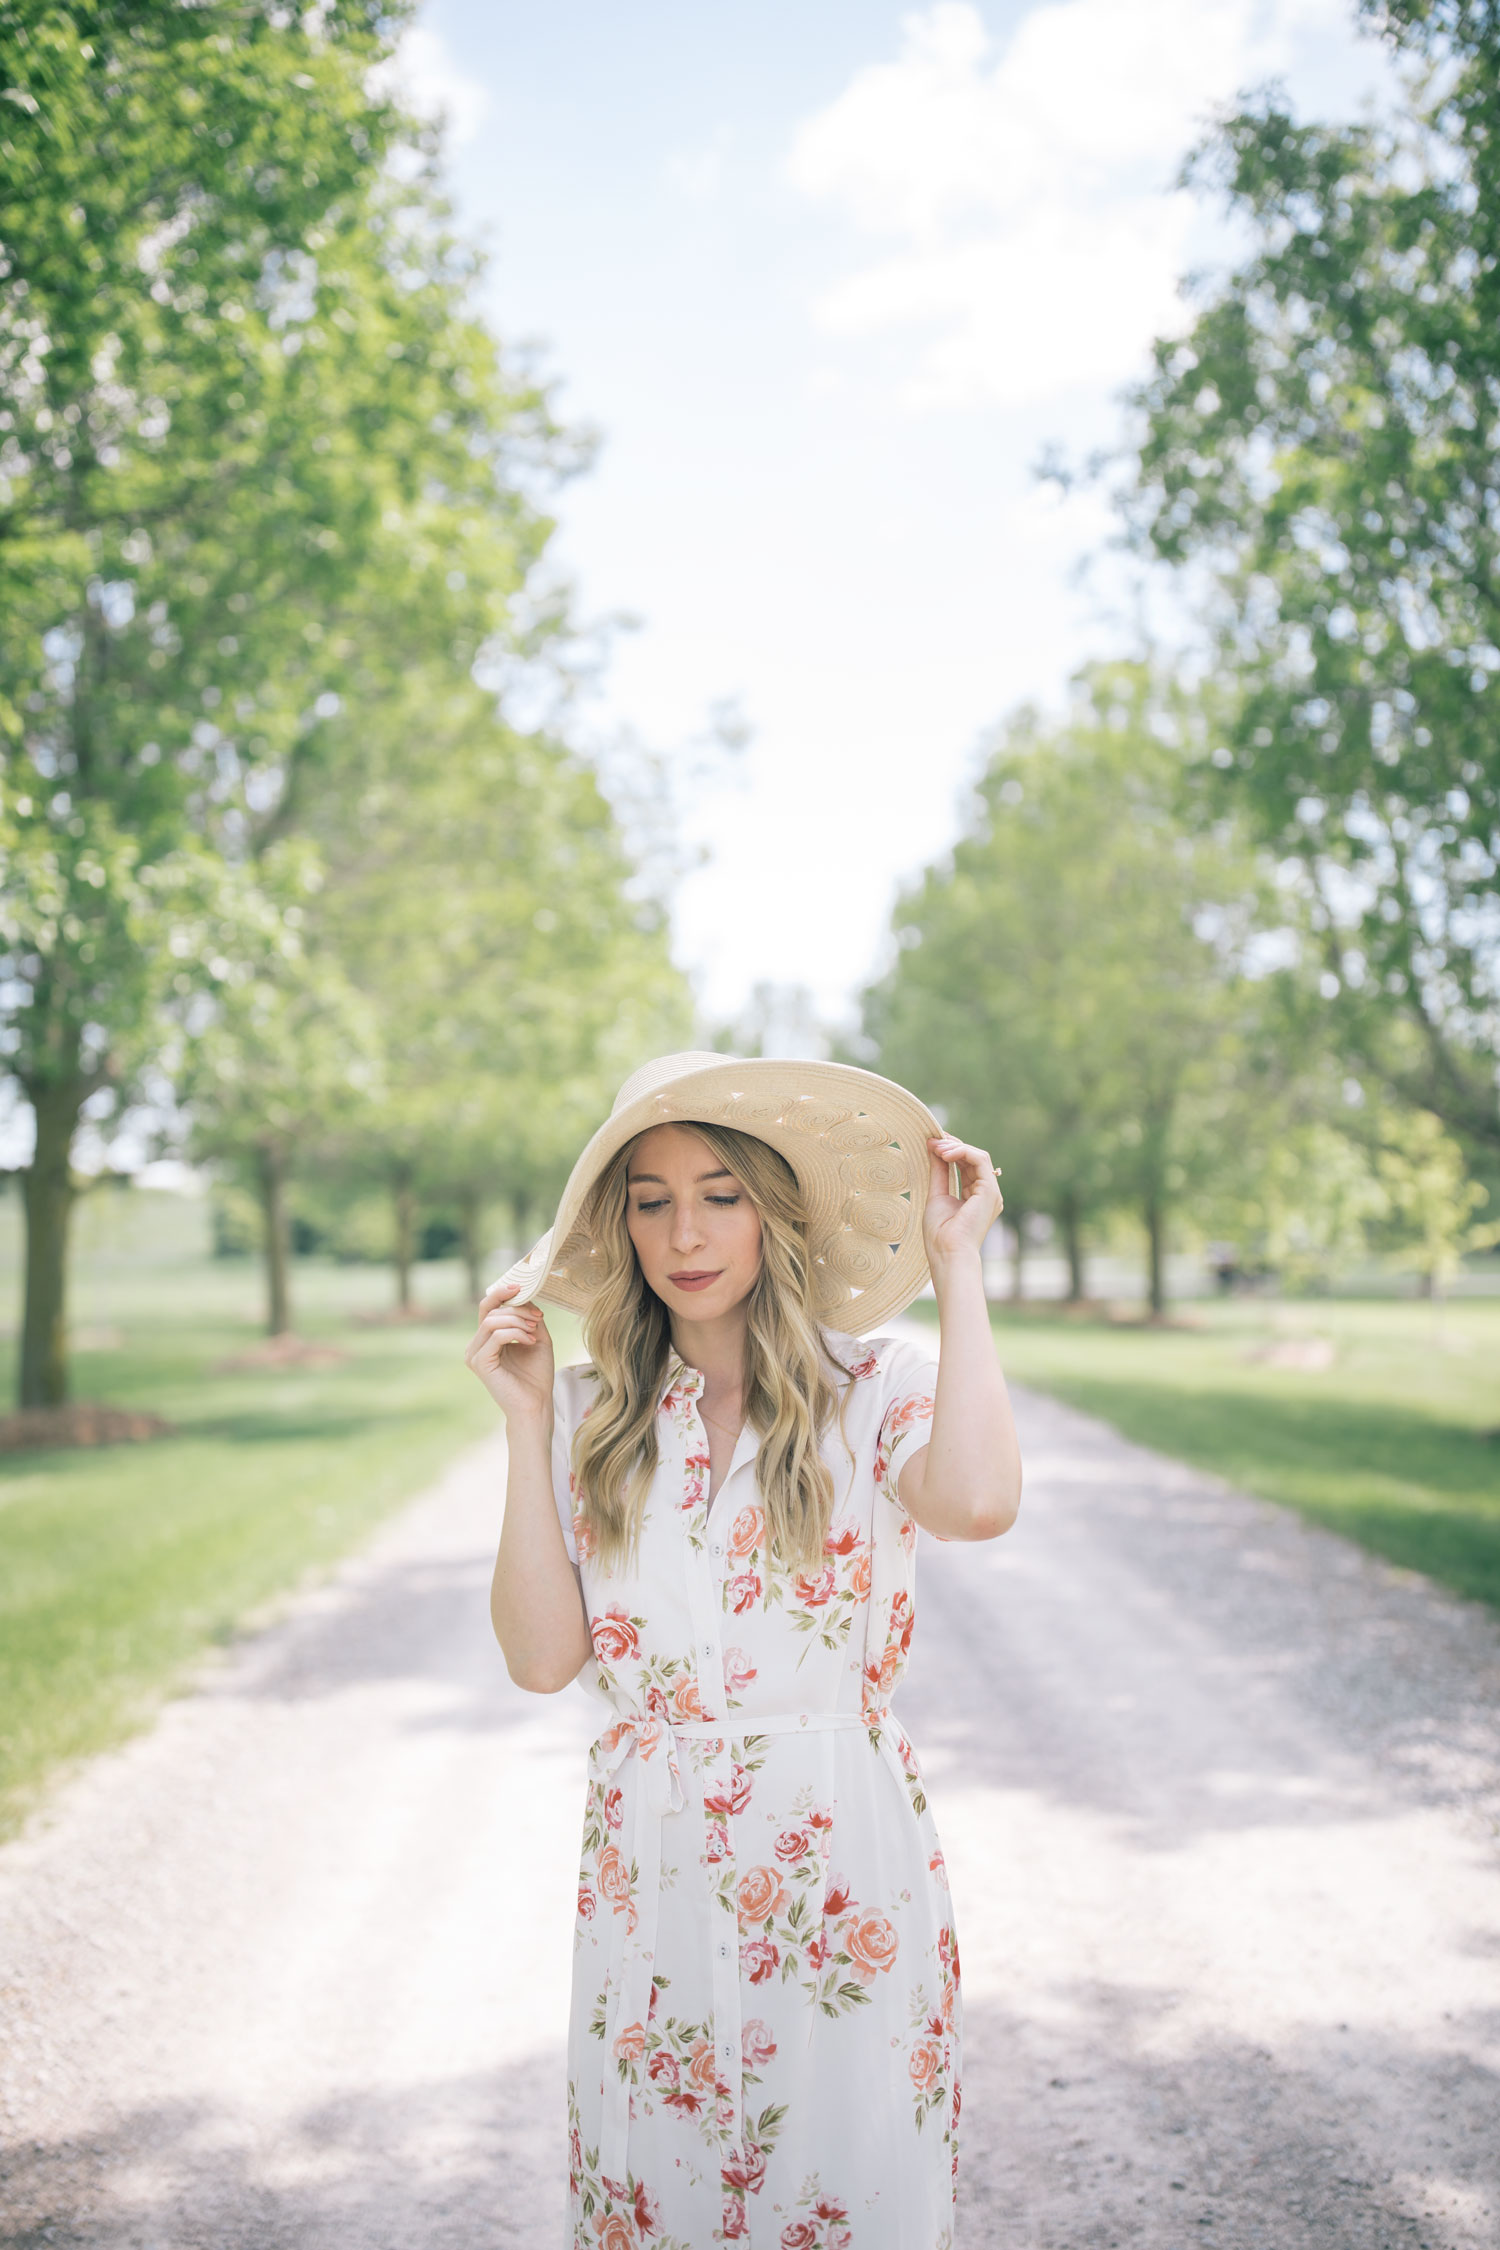 Another Trip To South Pond Farms | The Blondielocks | Life + Style